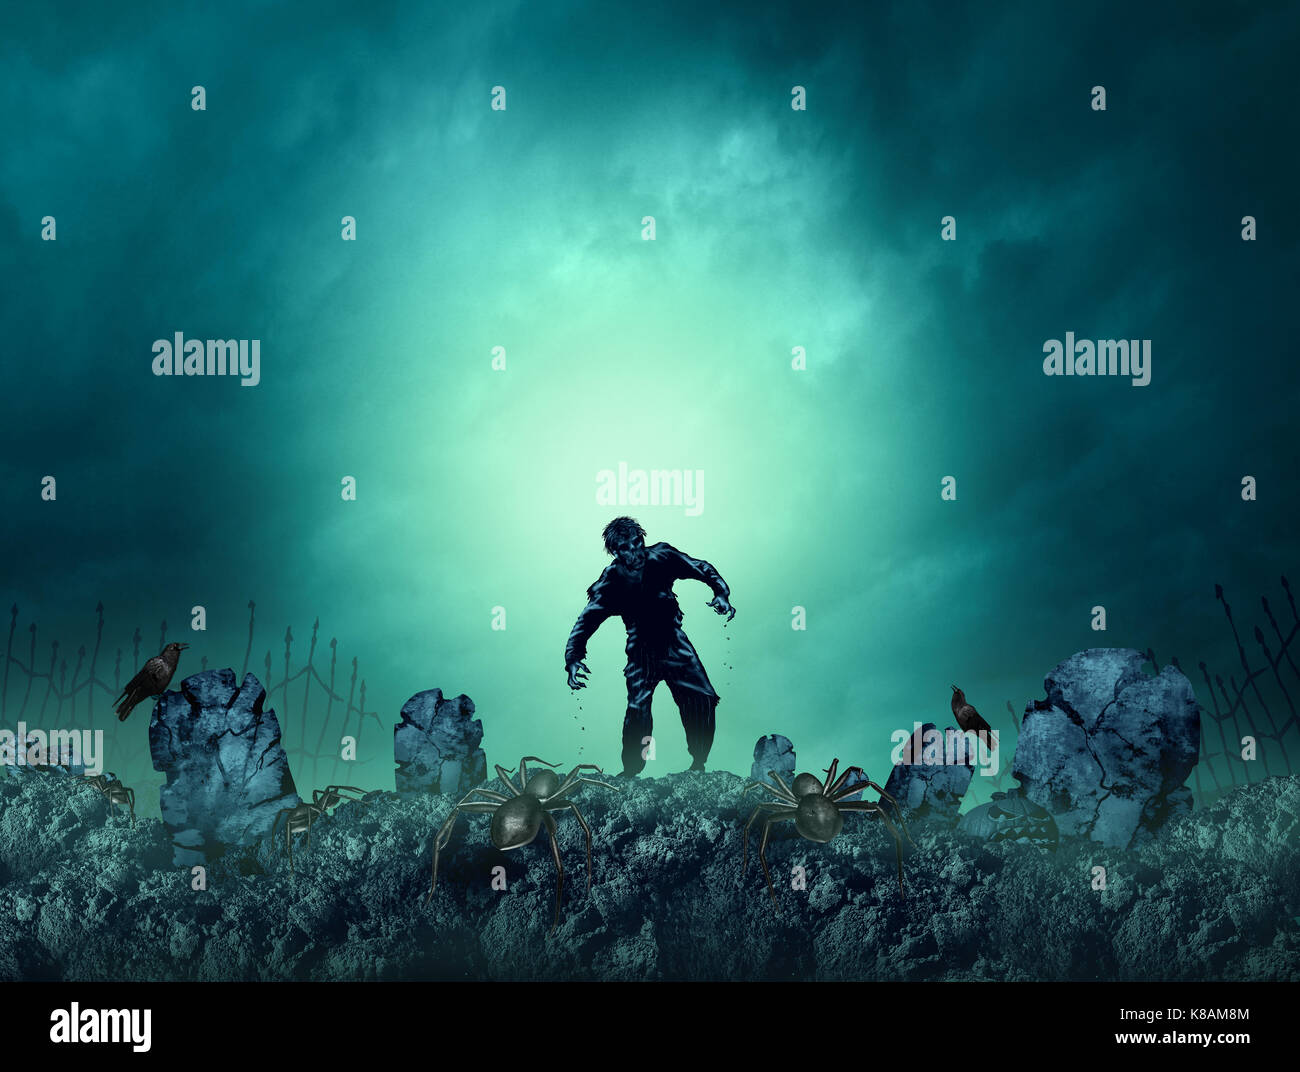 Zombie grave halloween background as a creepy walking monster in a blank area for text as a spooky dead scary ghost as an autumn holiday greeting. Stock Photo